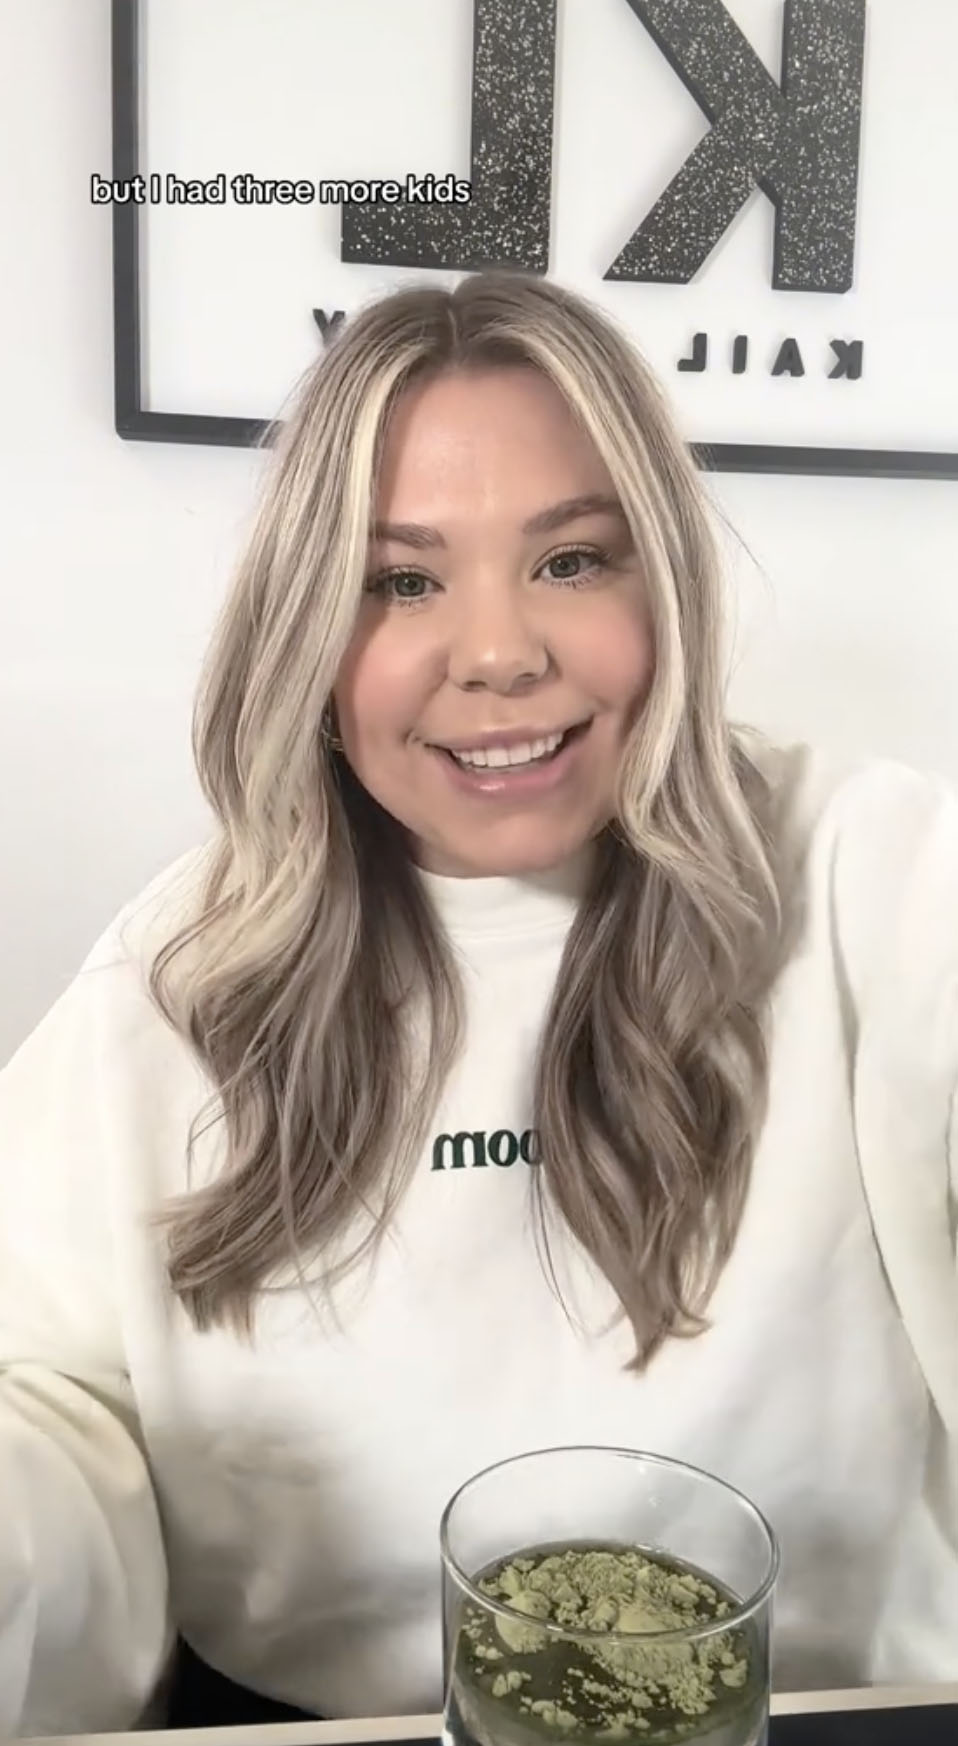 Fans online blame Kailyn for having a poor relationship with her son's father